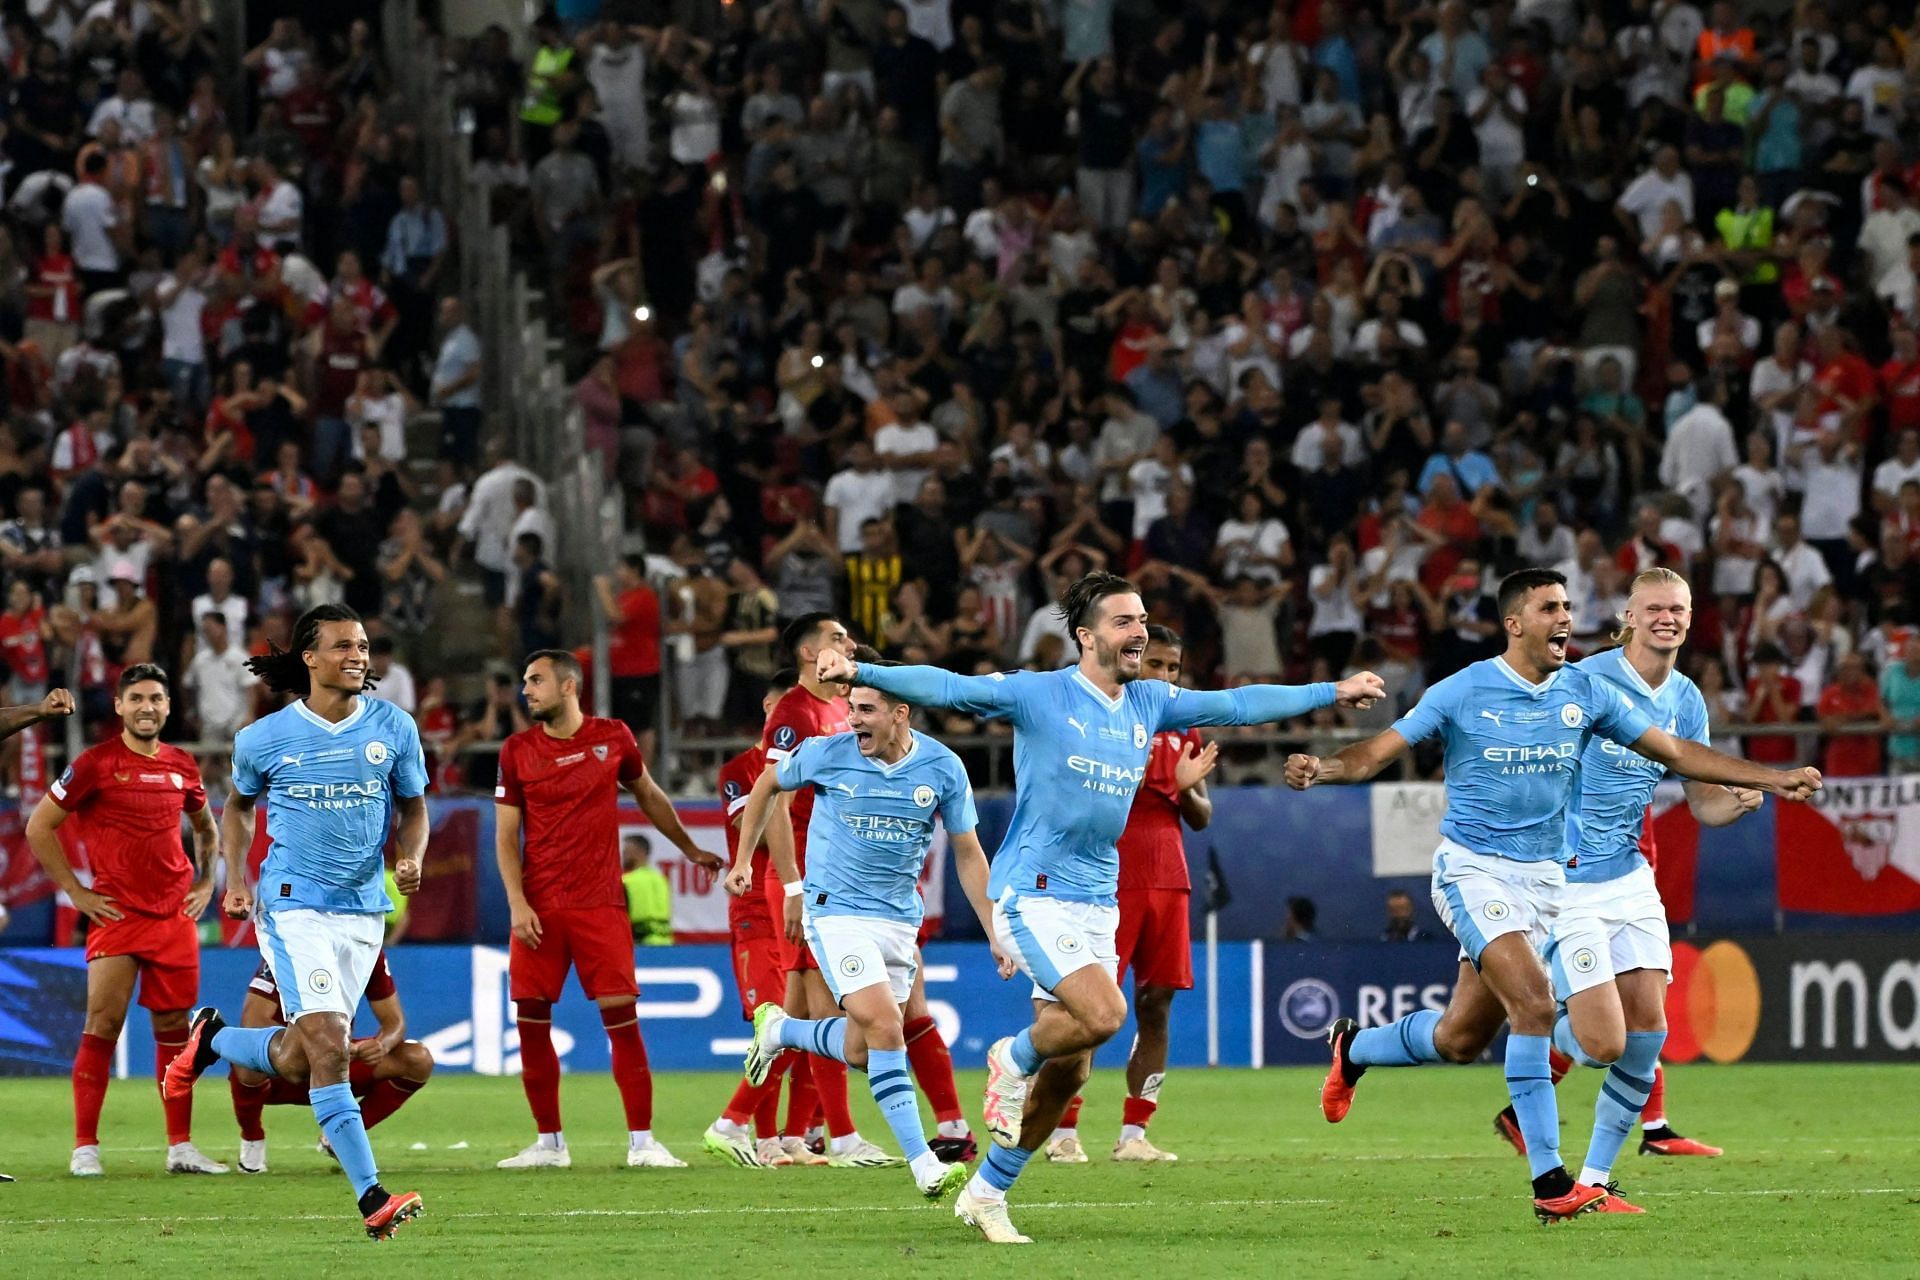 Sevilla lost their sixth UEFA Super Cup final against Manchester City